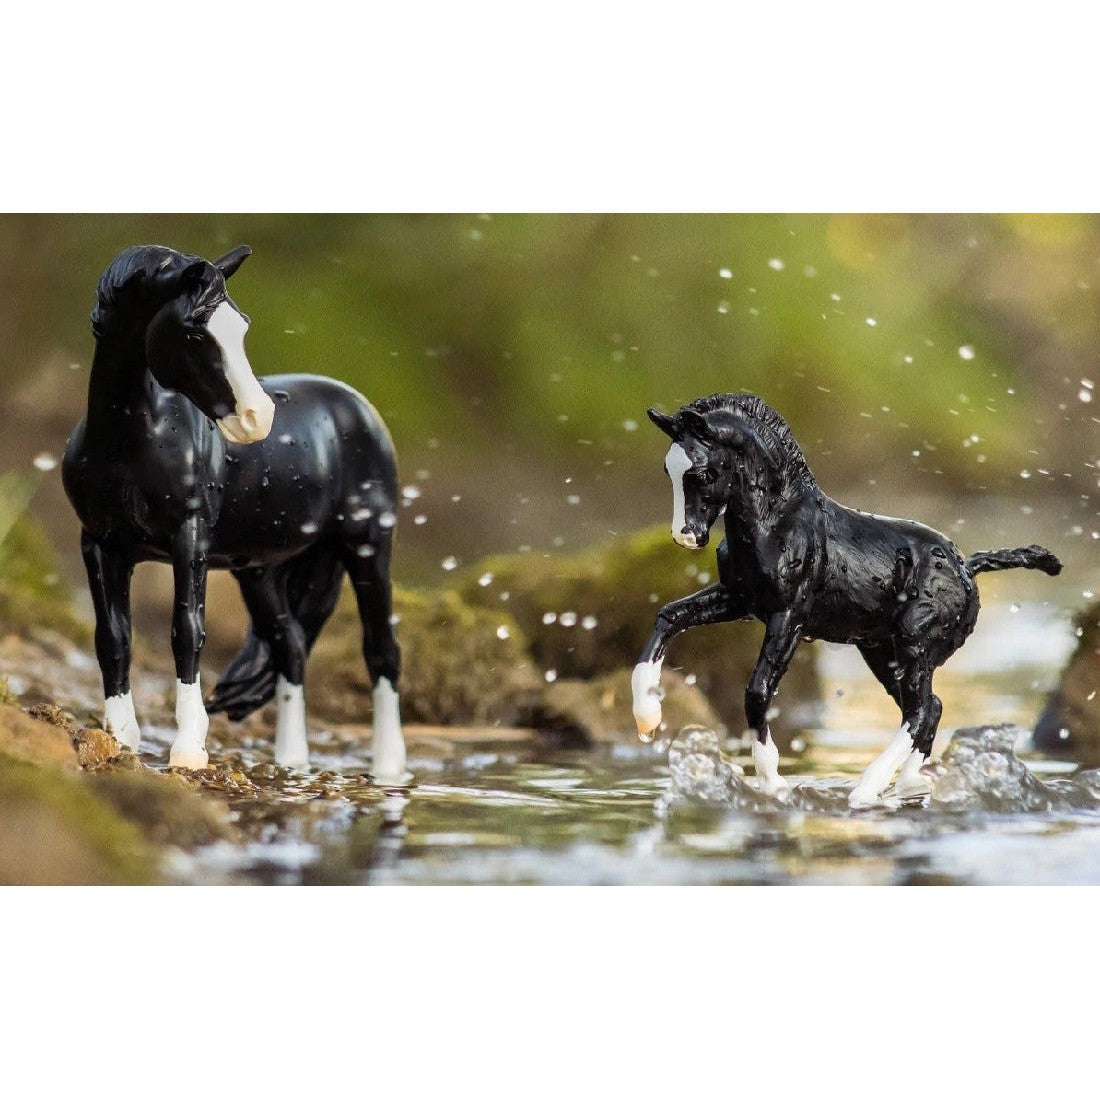 Two Breyer Horse Toys by water displaying dynamic and stationary poses.